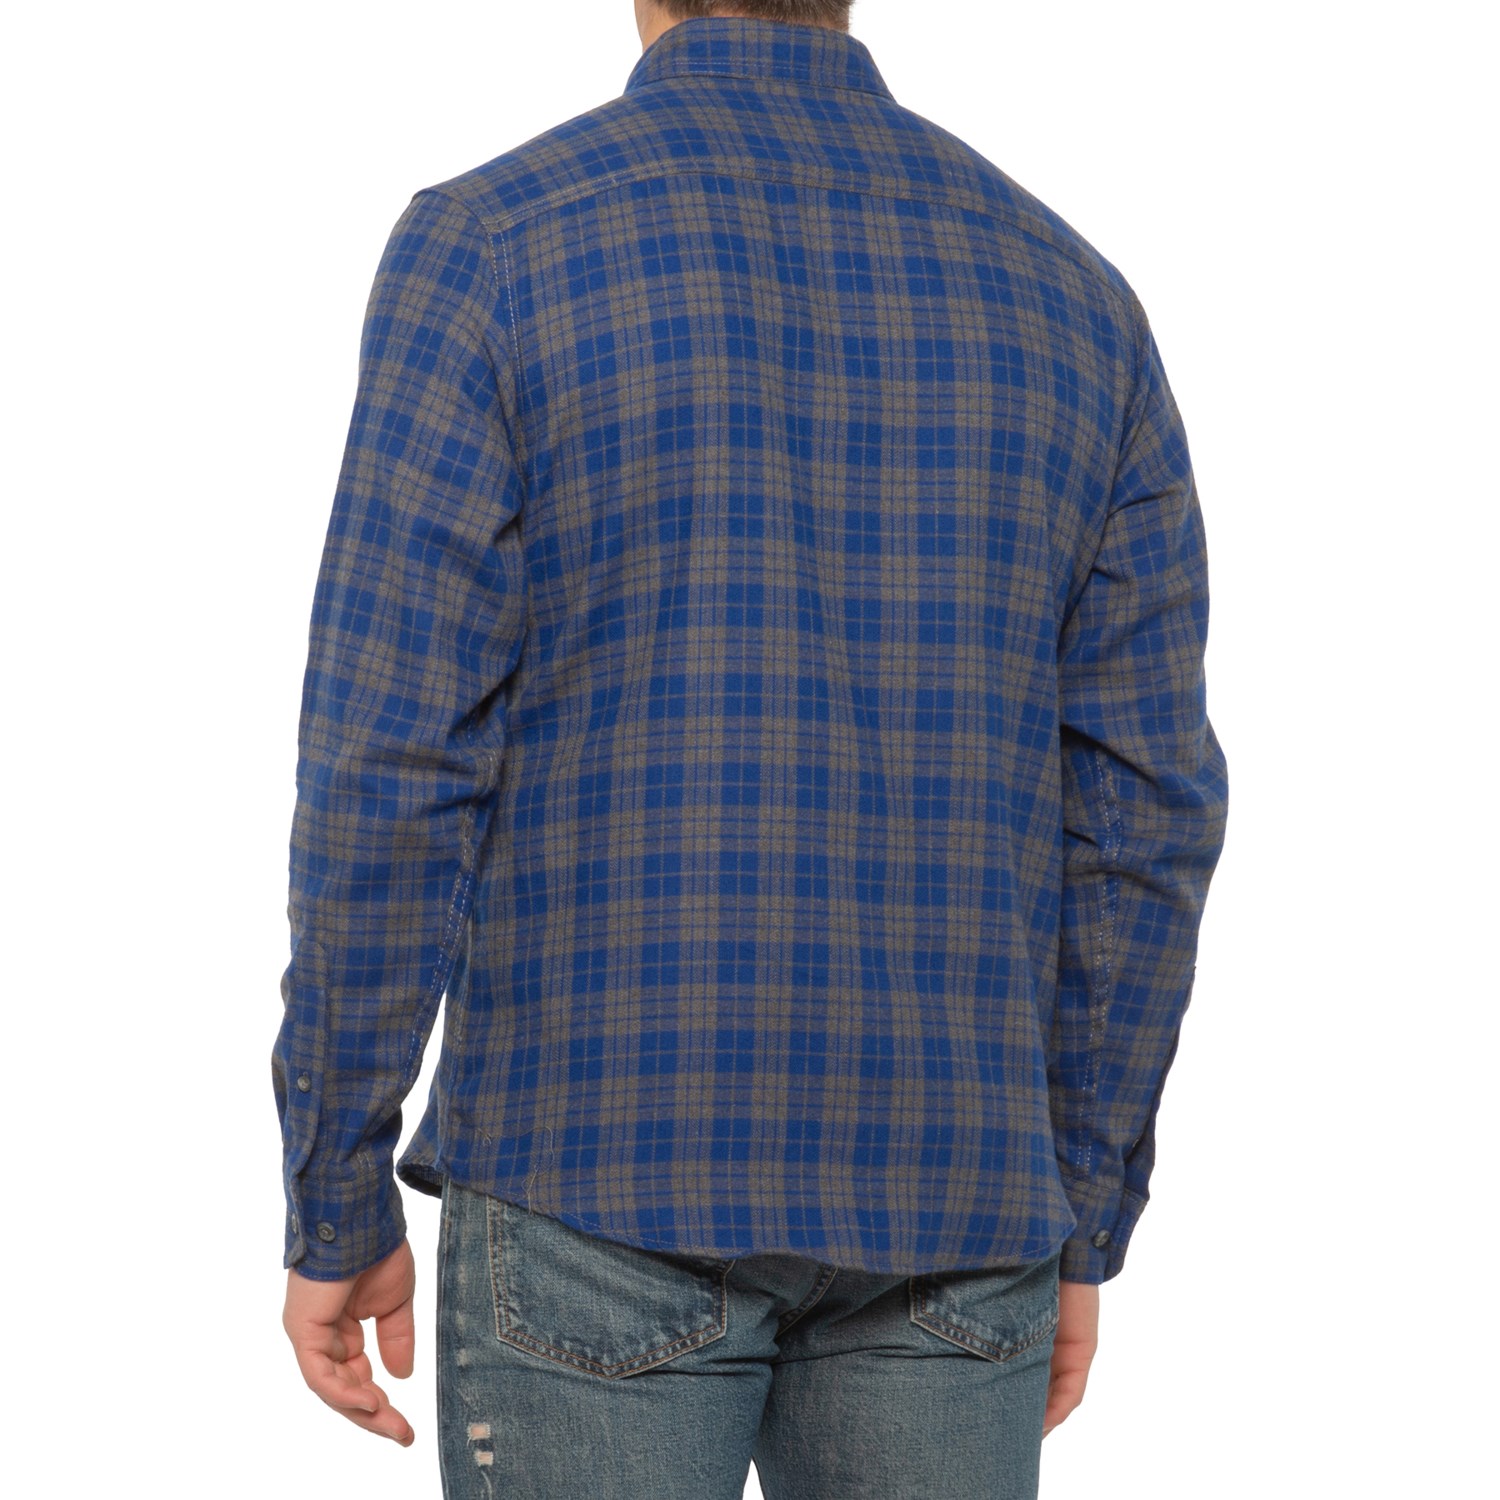 G.H. Bass & Co. Double-Pocket Plaid Flannel Shirt (For Men) - Save 57%